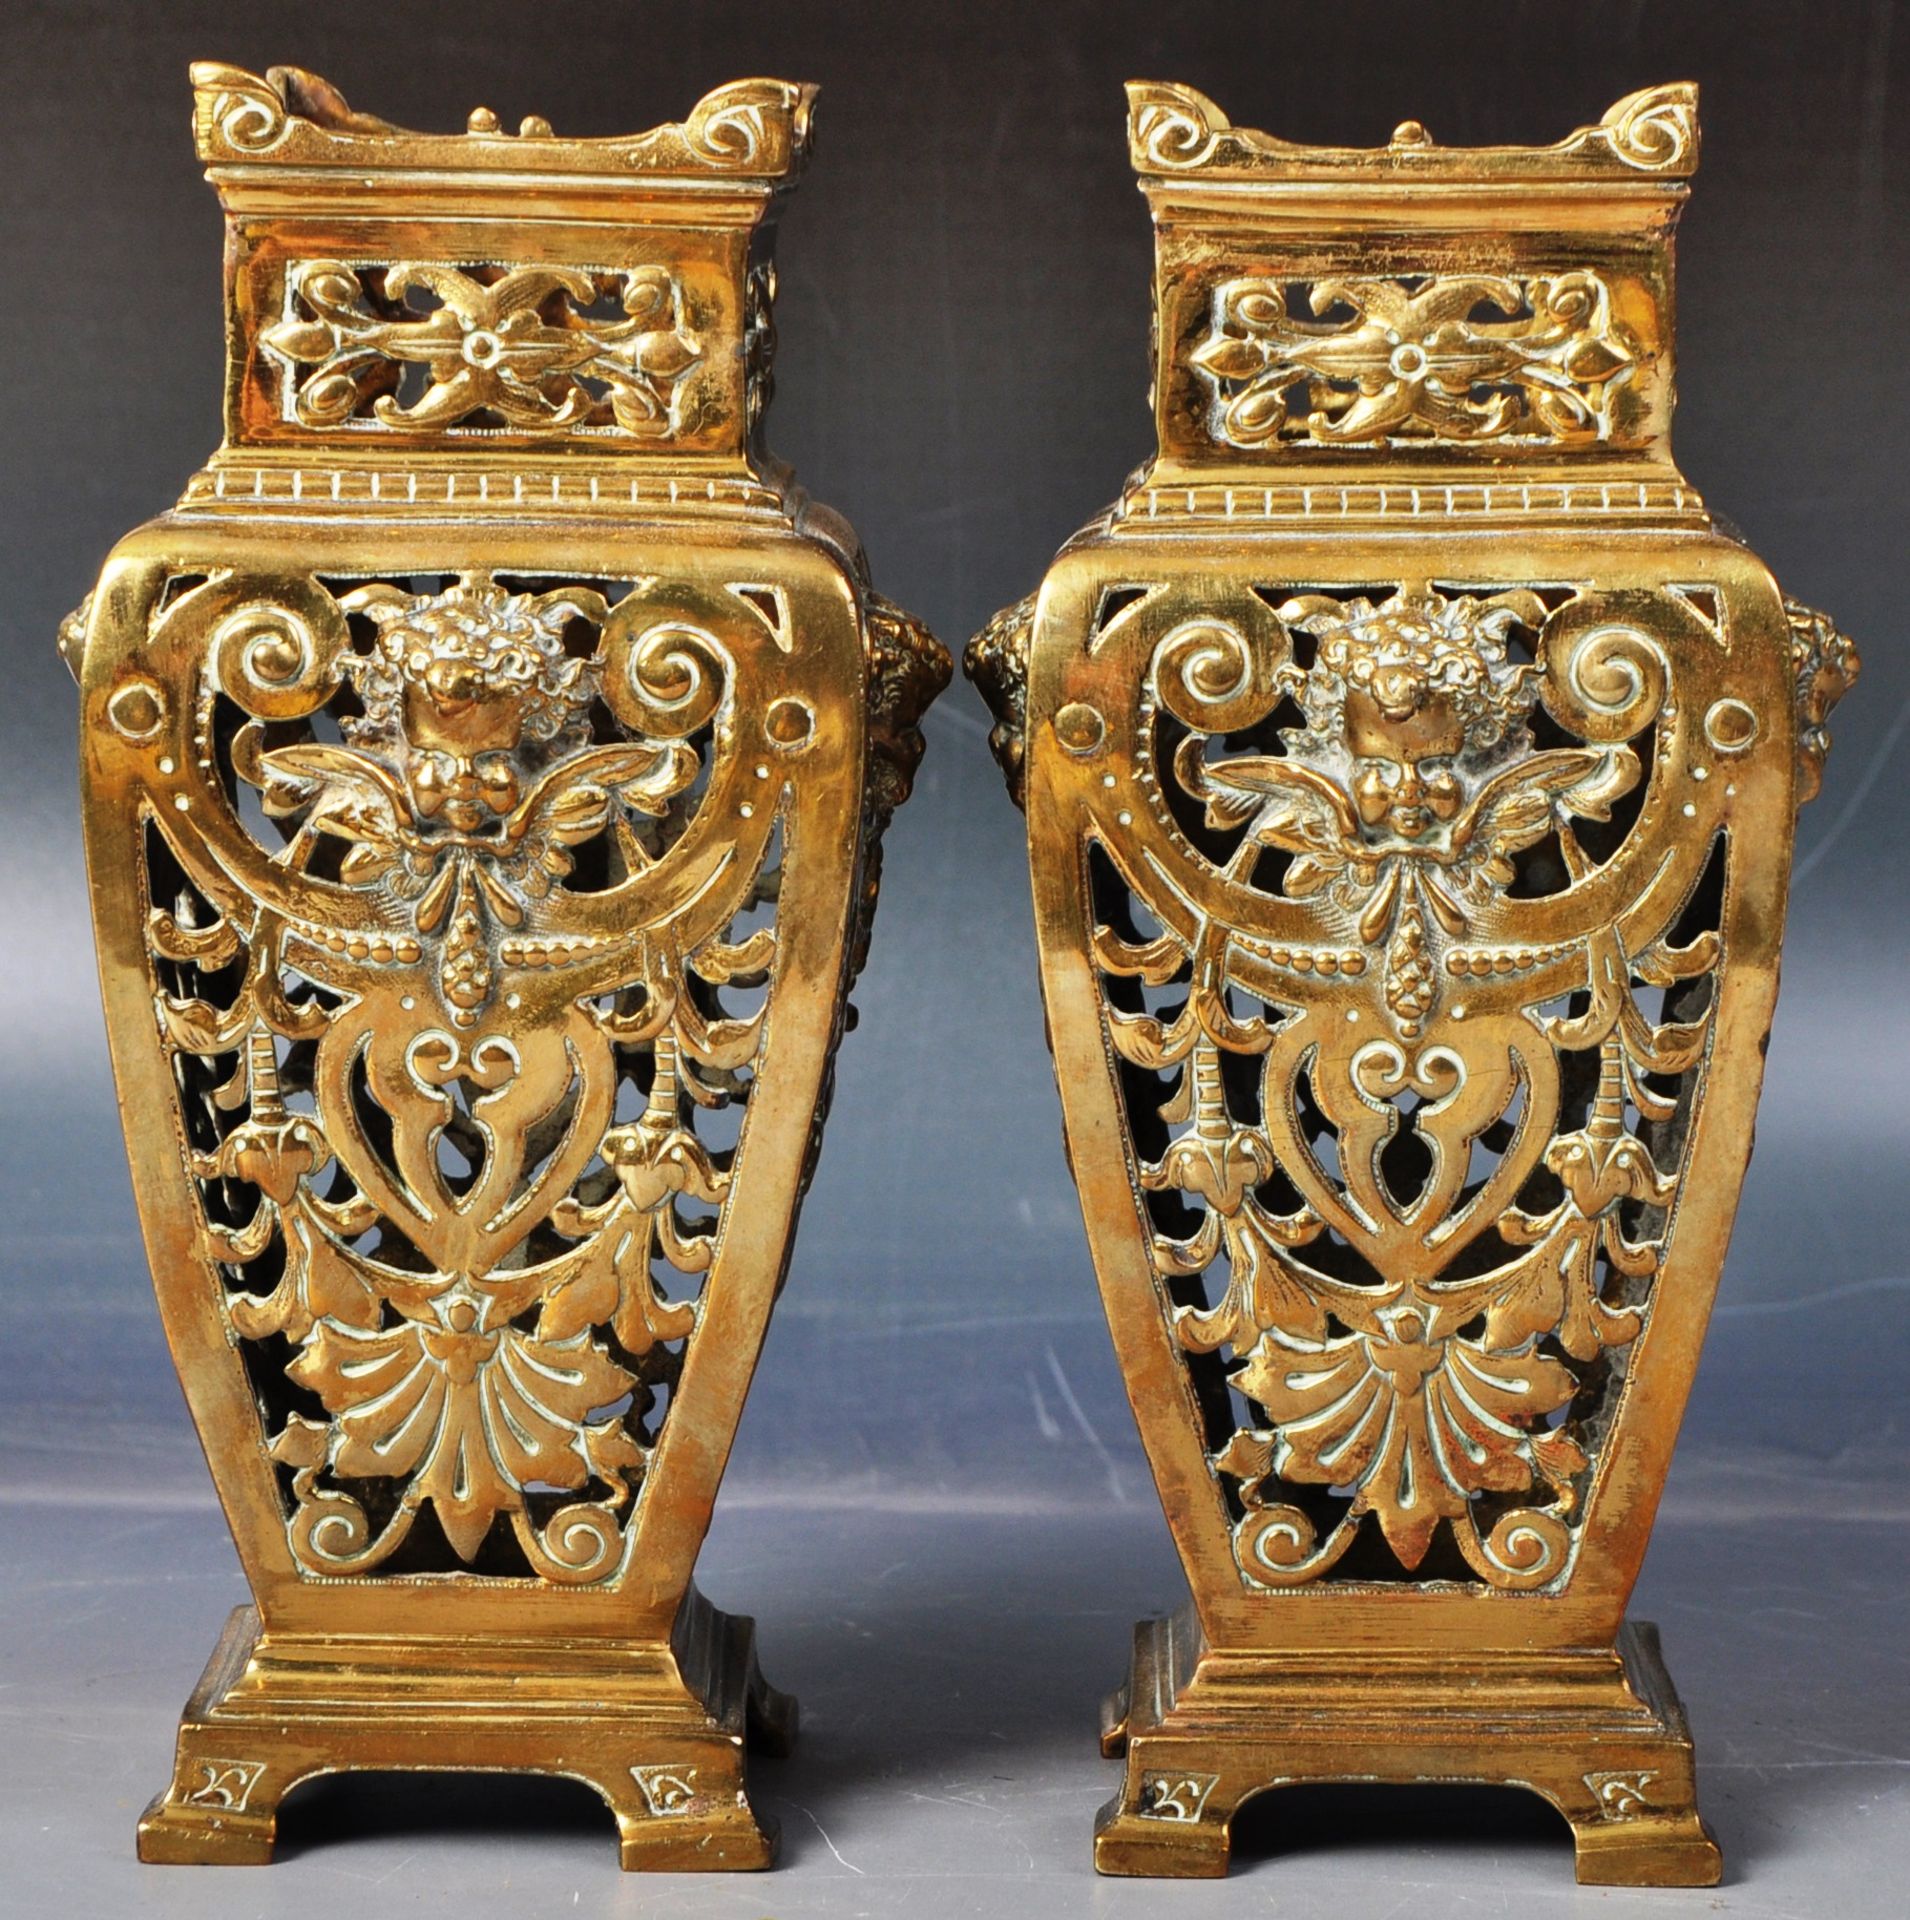 PAIR OF 19TH CENTURY VICTORIAN NEOCLASSICAL BRASS VASES